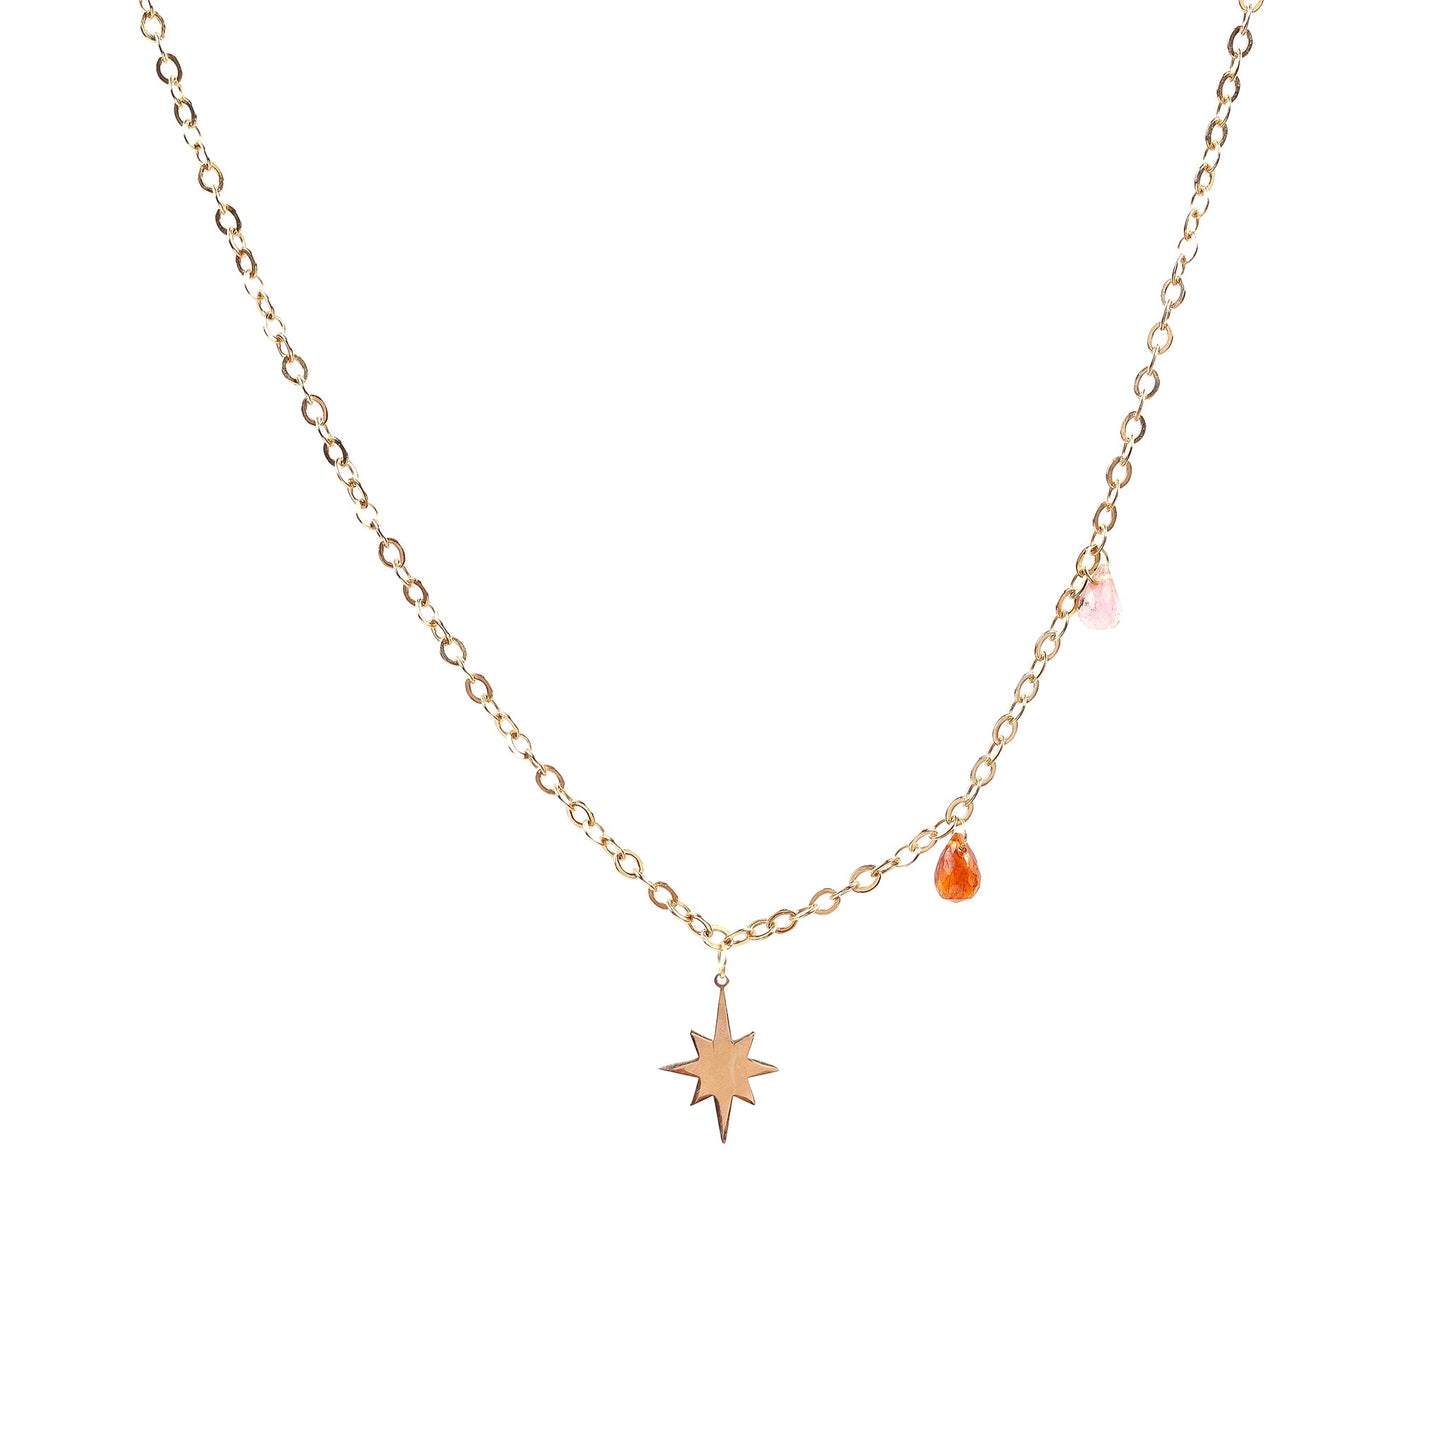 Load image into Gallery viewer, The North Star Necklace - Oria.jewelry
